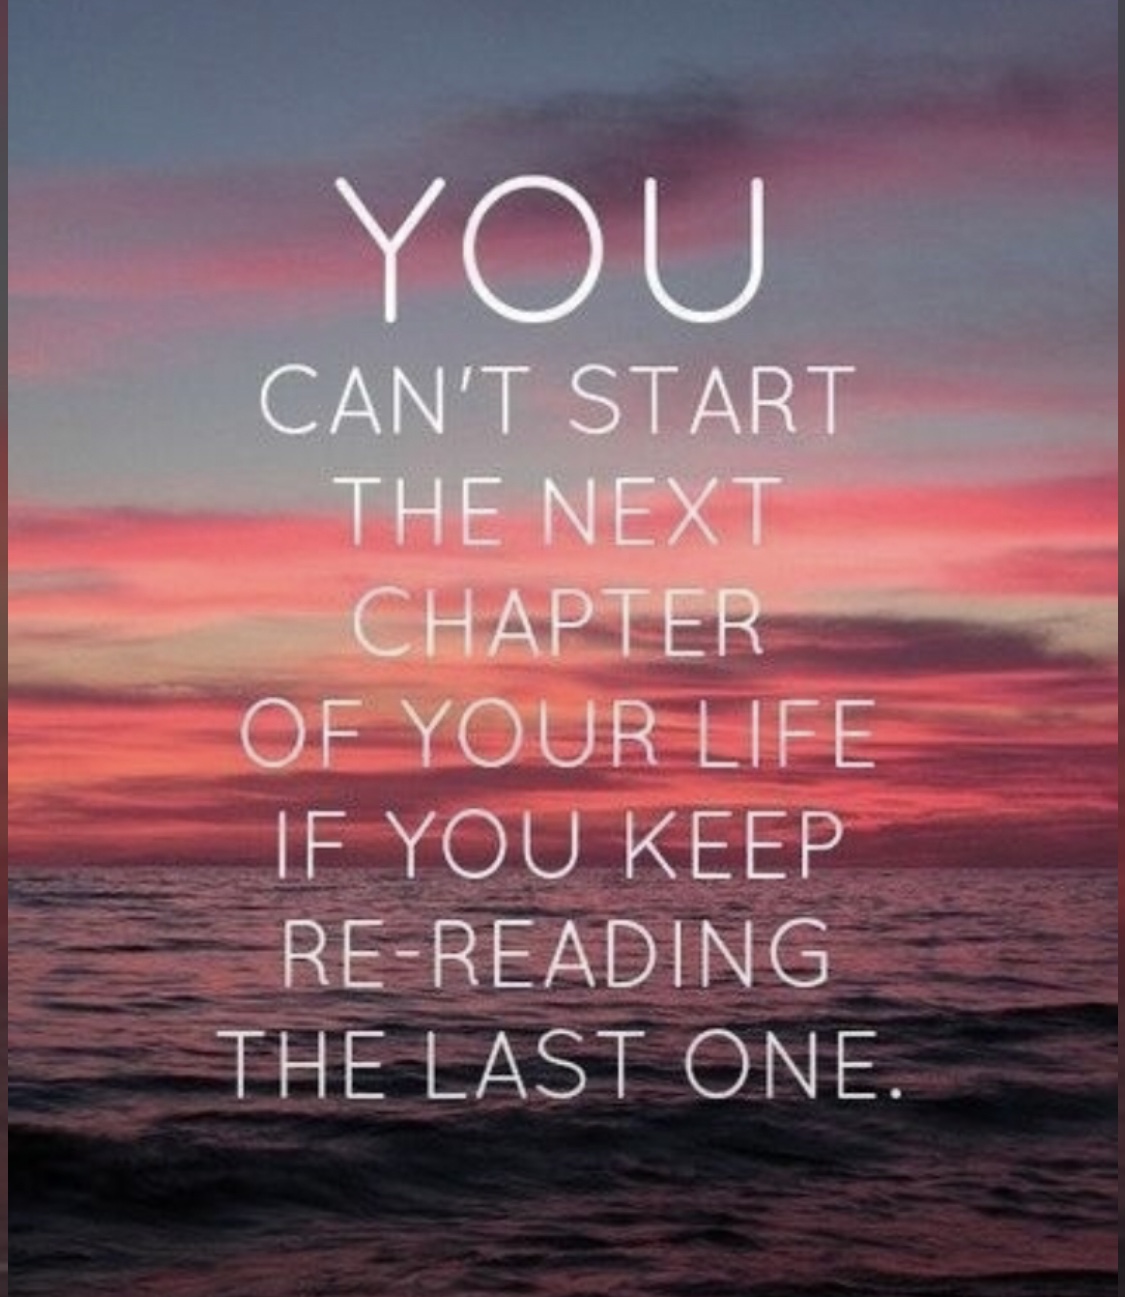 You can't start the next chapter of your life if you keep reading the last one, Rise and Renew: Post-Split Support.